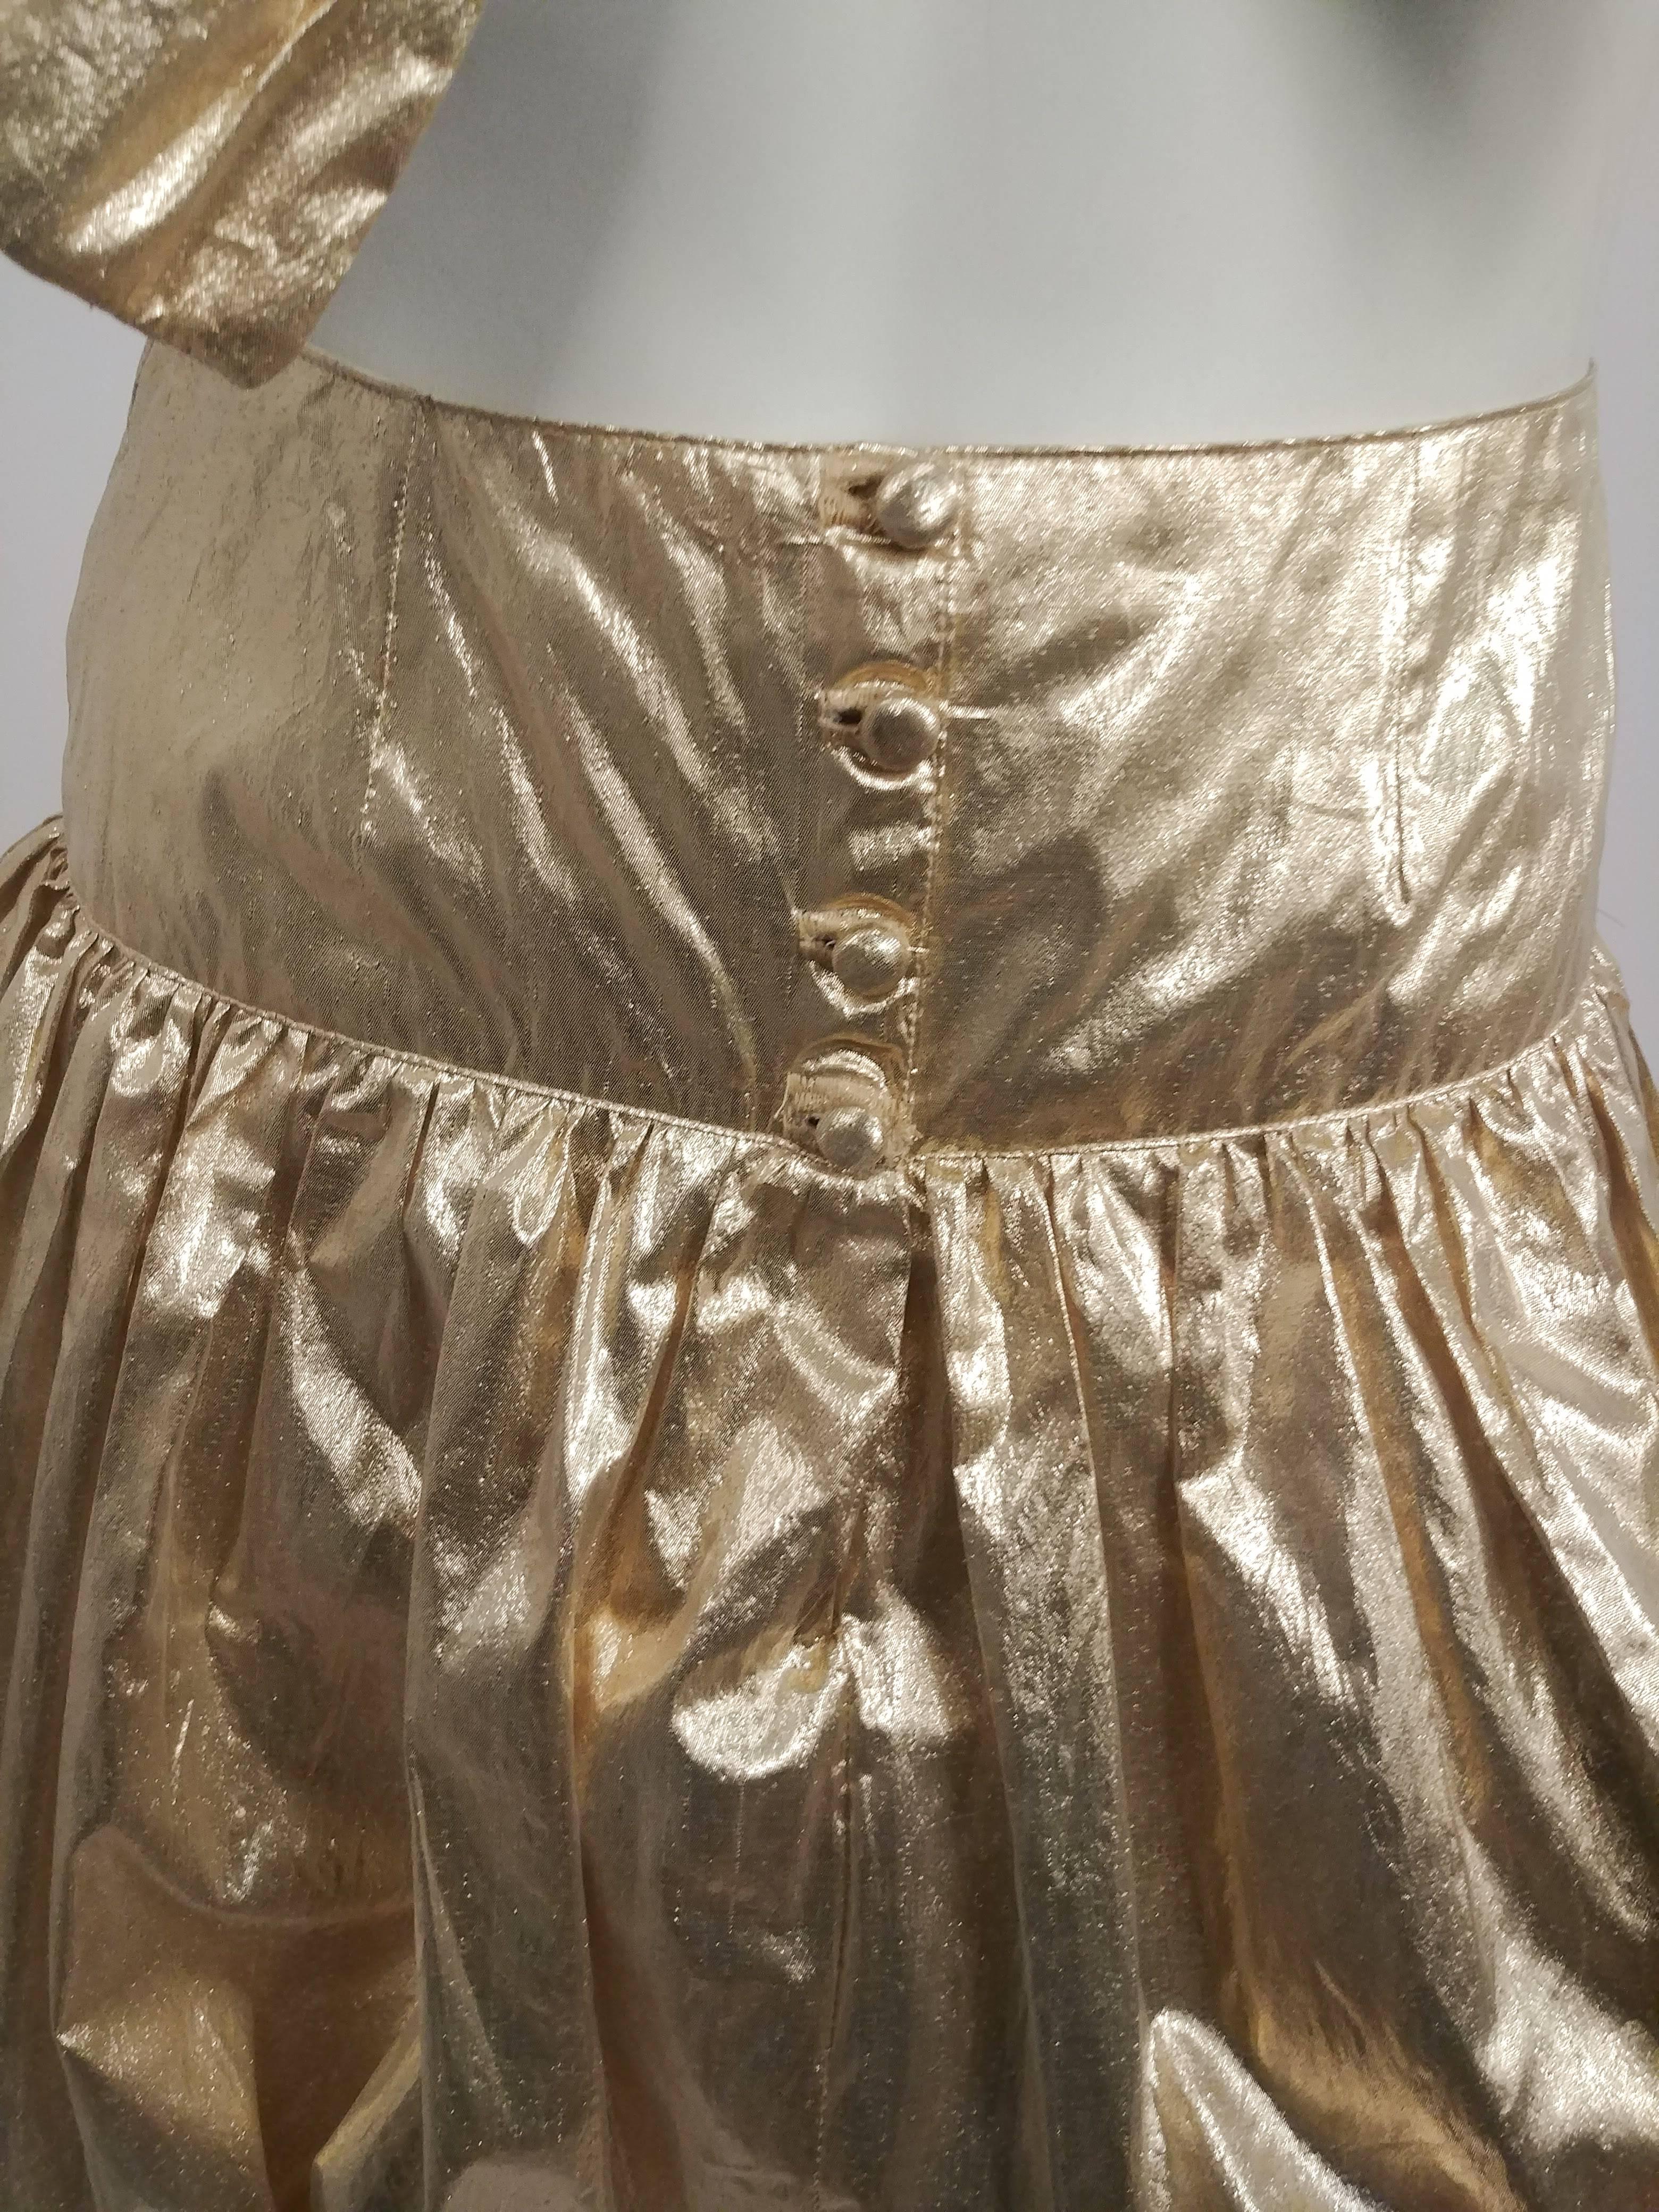 1970s Gold Lamé Bow Top & Bubble Skirt Set. Giant decorative bow covers the front of the bra top, hook & eye claps in back, adjustable. High waisted skirt, buttons up front, extreme bubble effect makes for grate statement piece! 